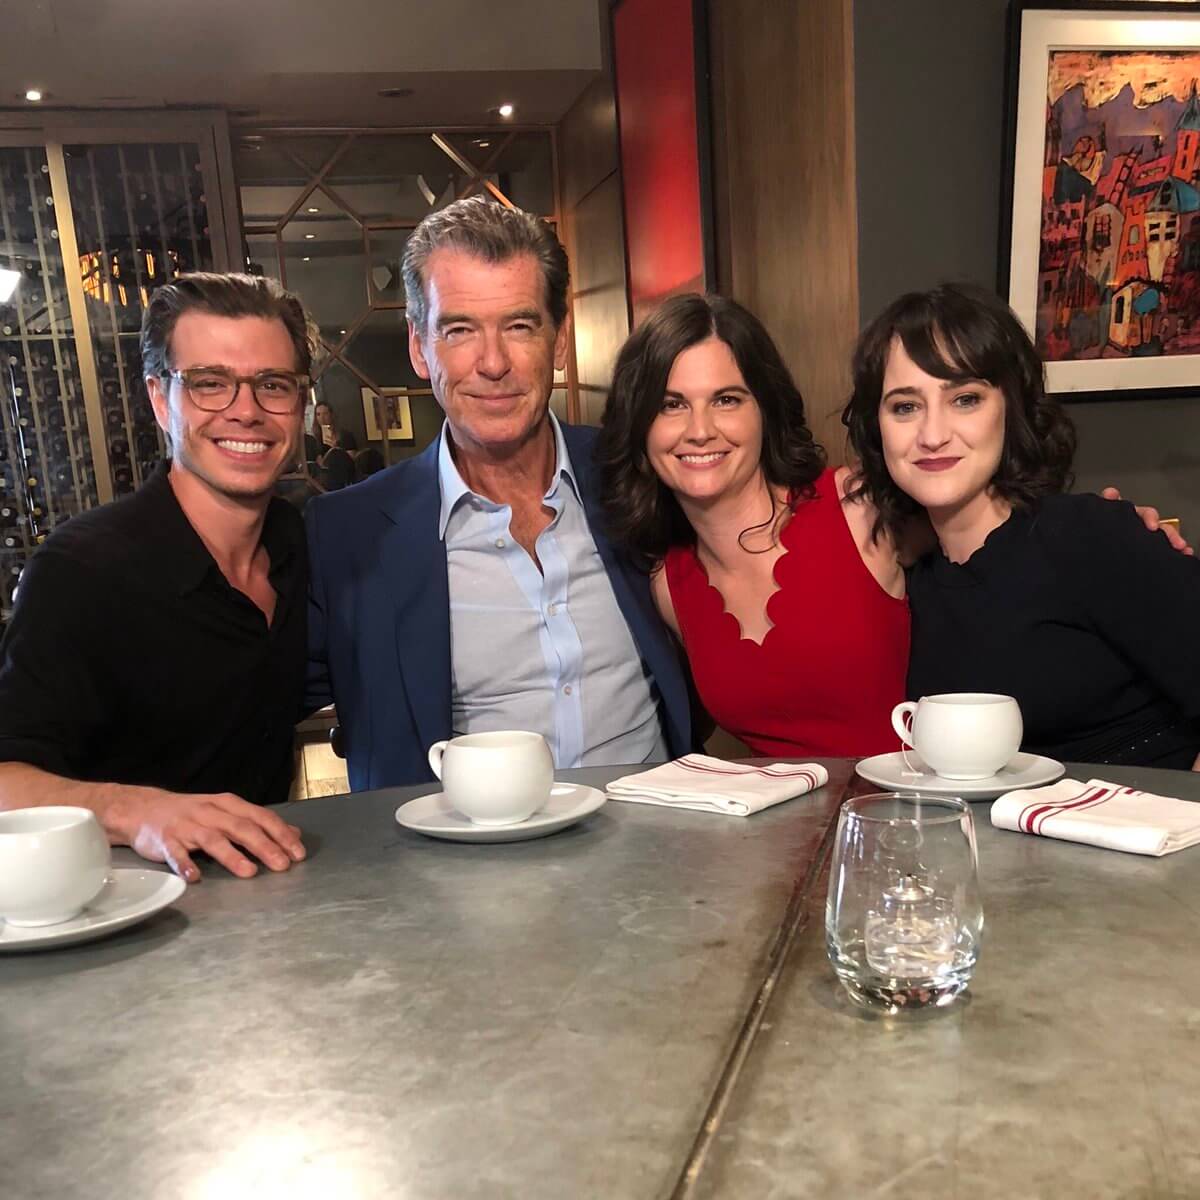 All Grown Up: Pierce Brosnan Reunites With The Mrs. Doubtfire Cast 25 Years Later